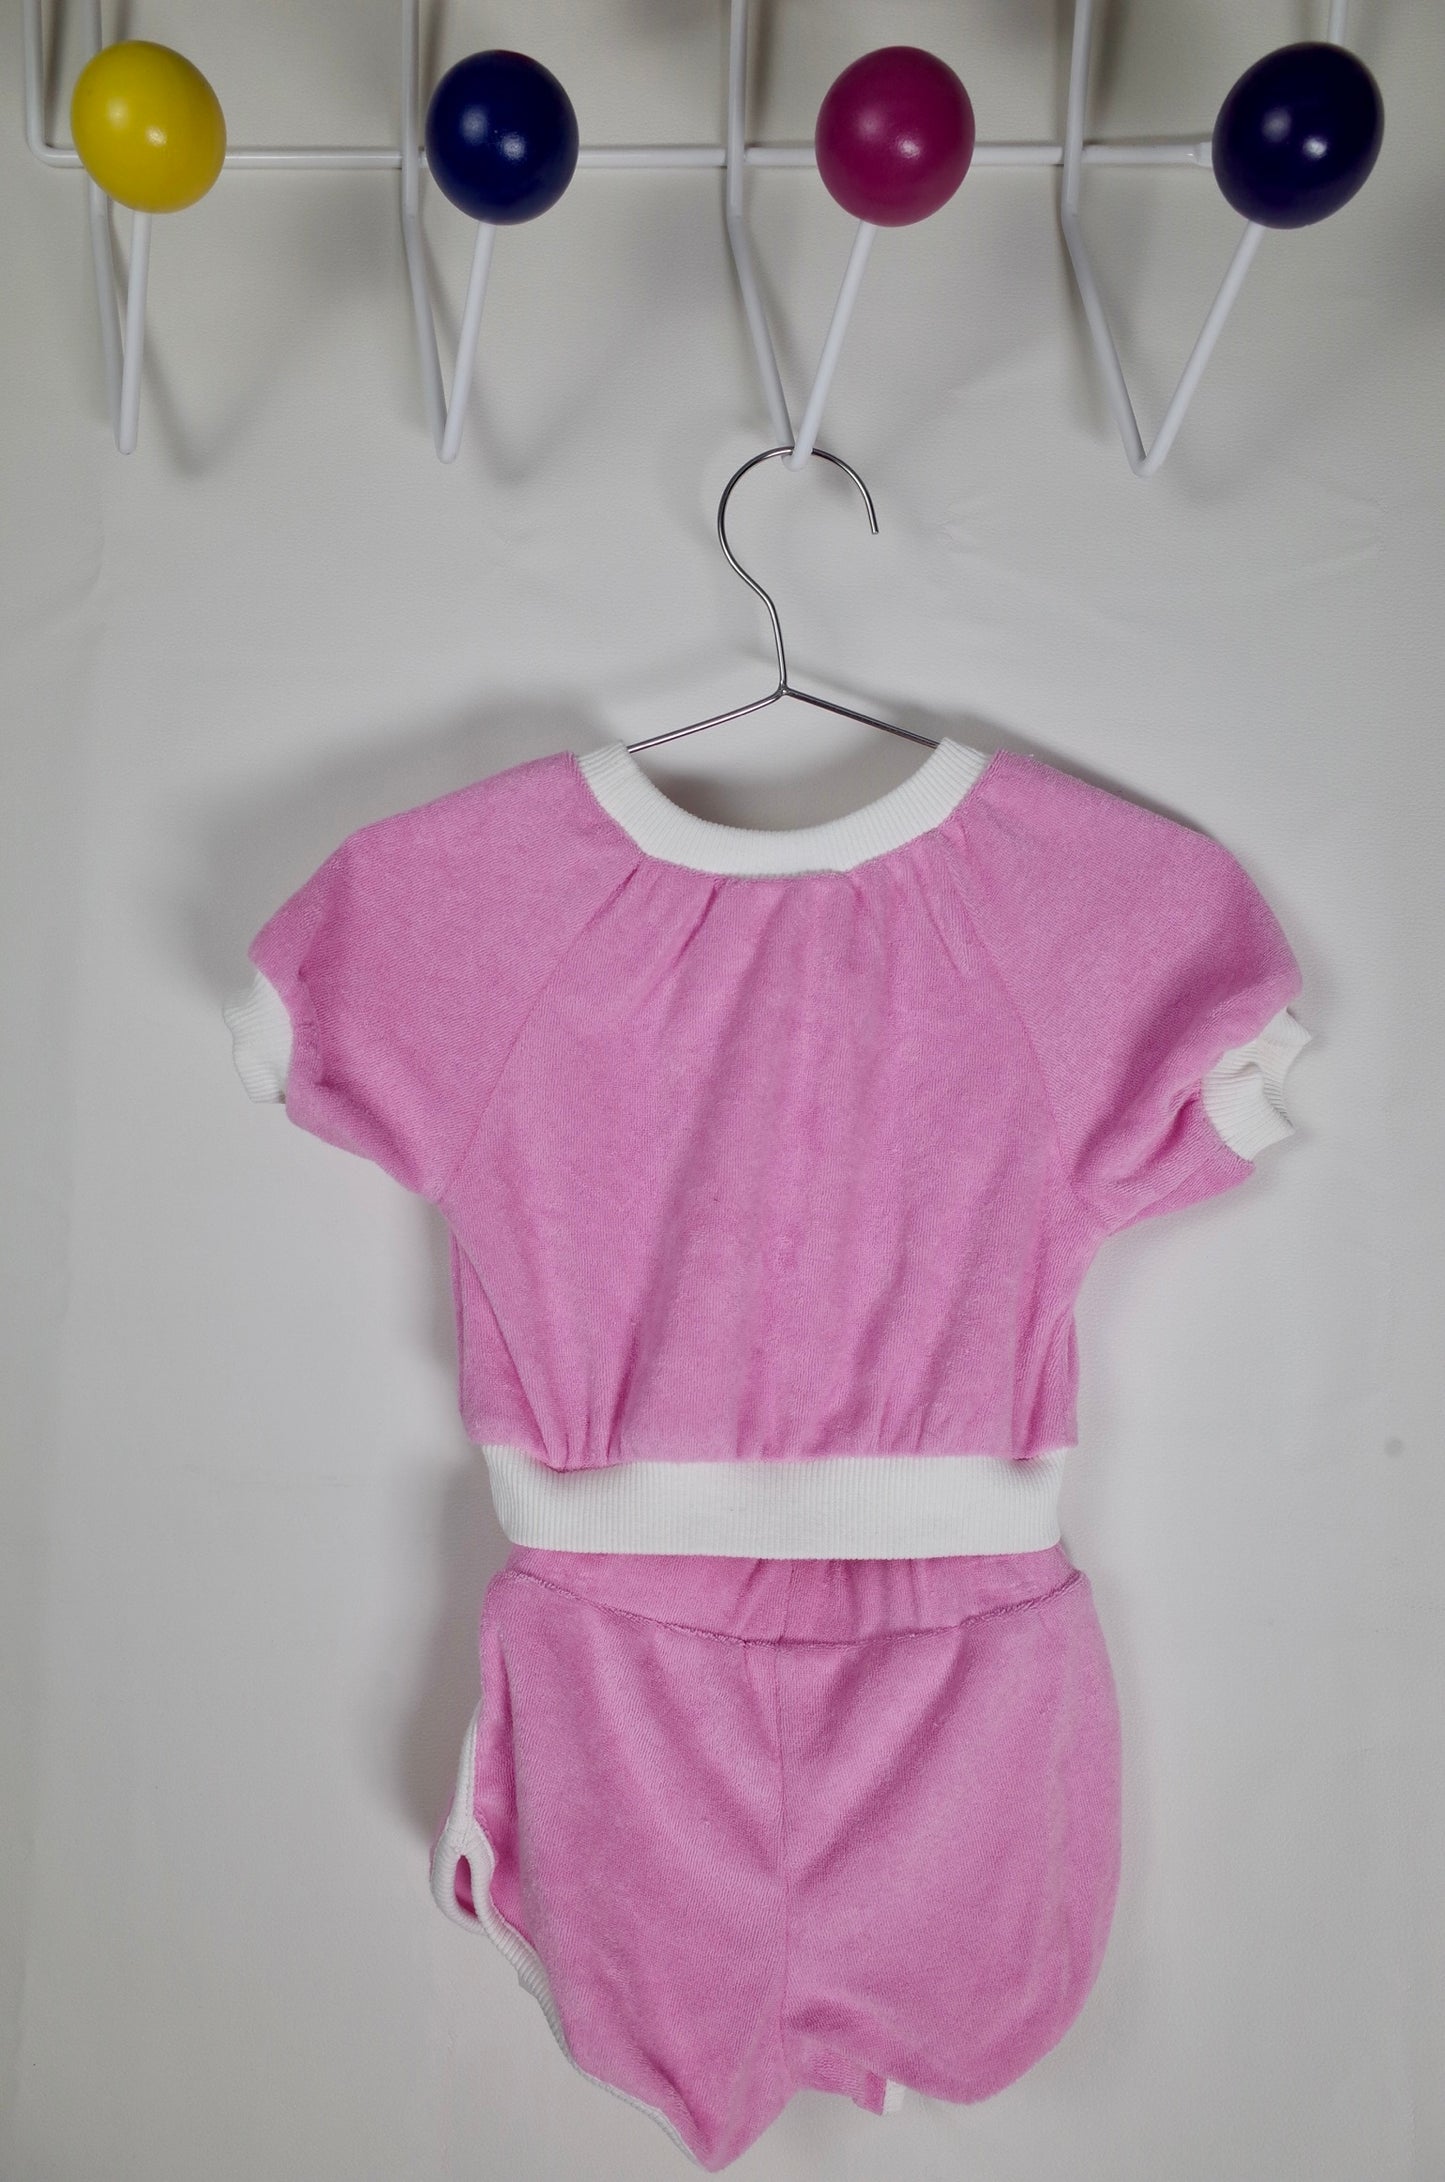 Juicy Couture Toddler Terry Set